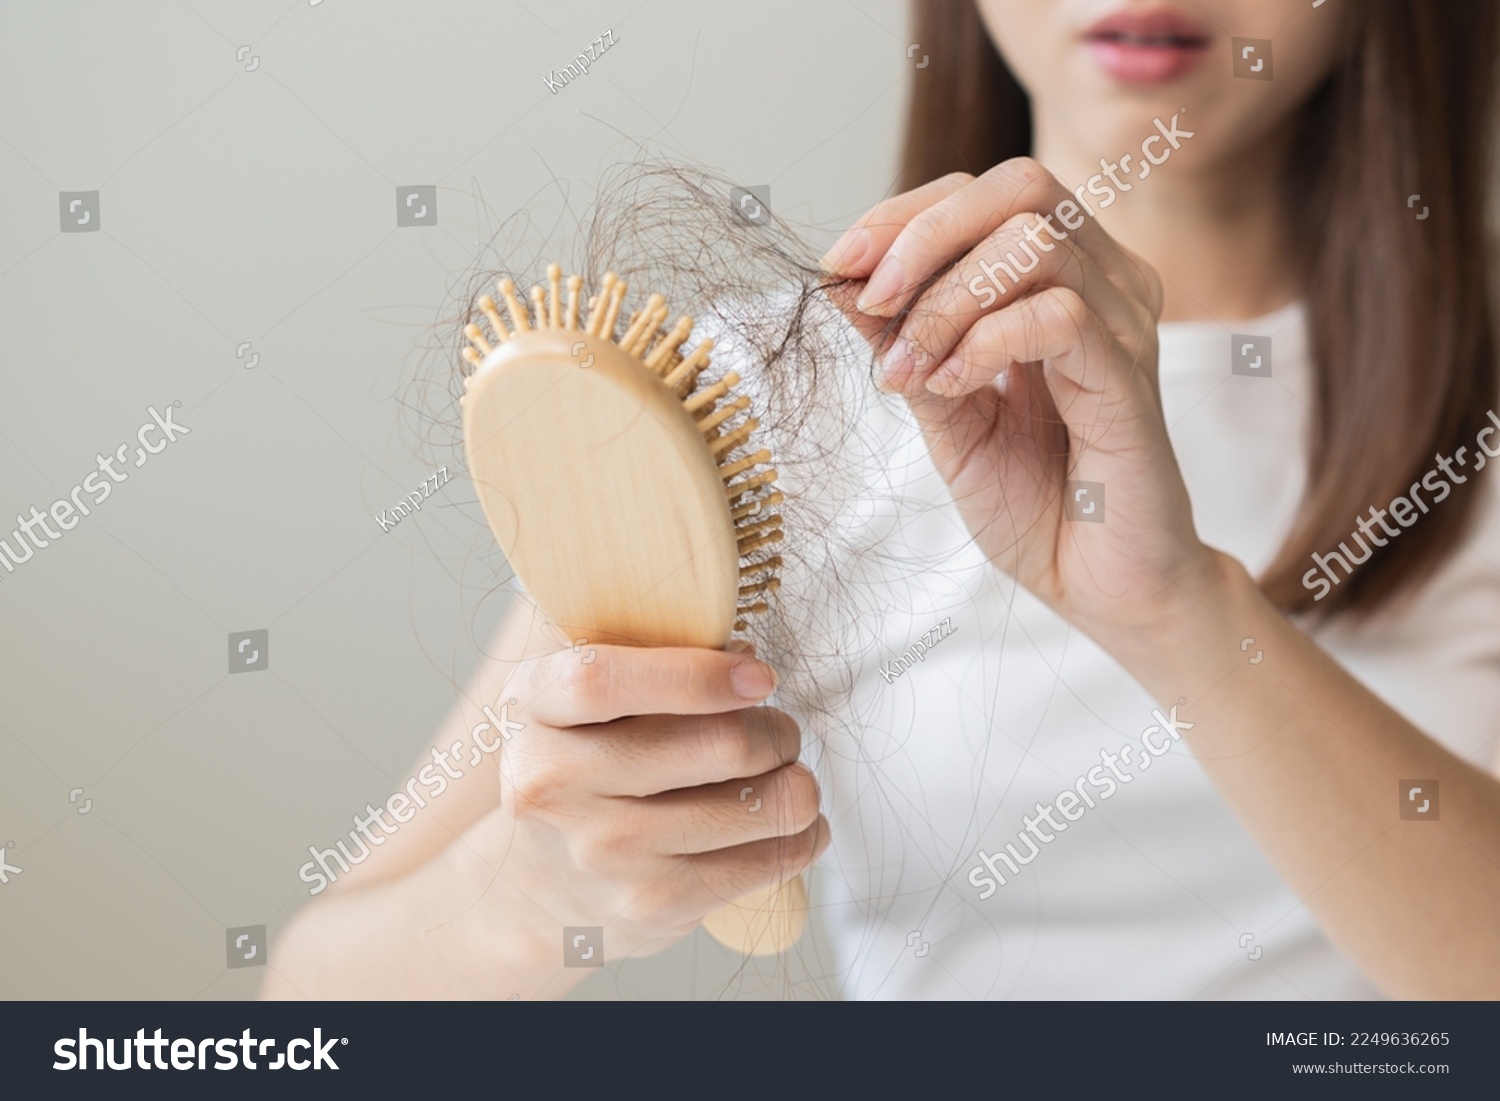 Serious asian young woman holding brush holding comb, hairbrush with fall black hair from scalp after brushing, looking on hand worry about balding. Health care, beauty treatment, hair loss problem. #2249636265